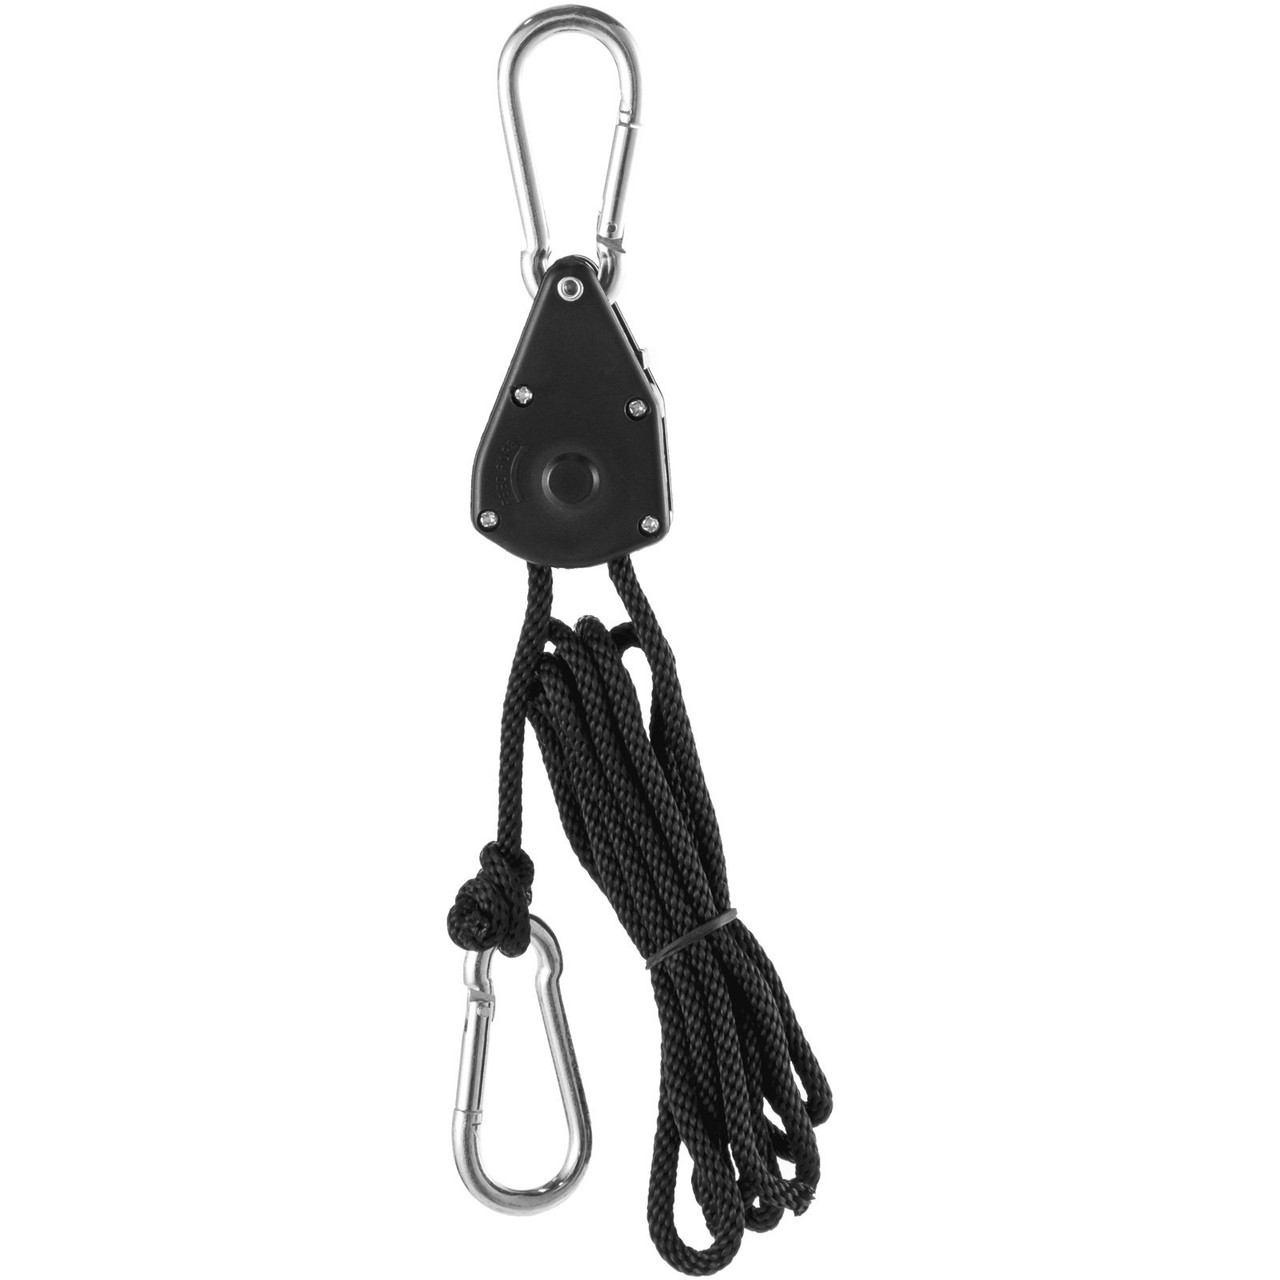 Grow Light Rope 25Pair, Heavy Duty Adjustable Rope Clip Hanger 1/8 Inch,  Grow Light Rope